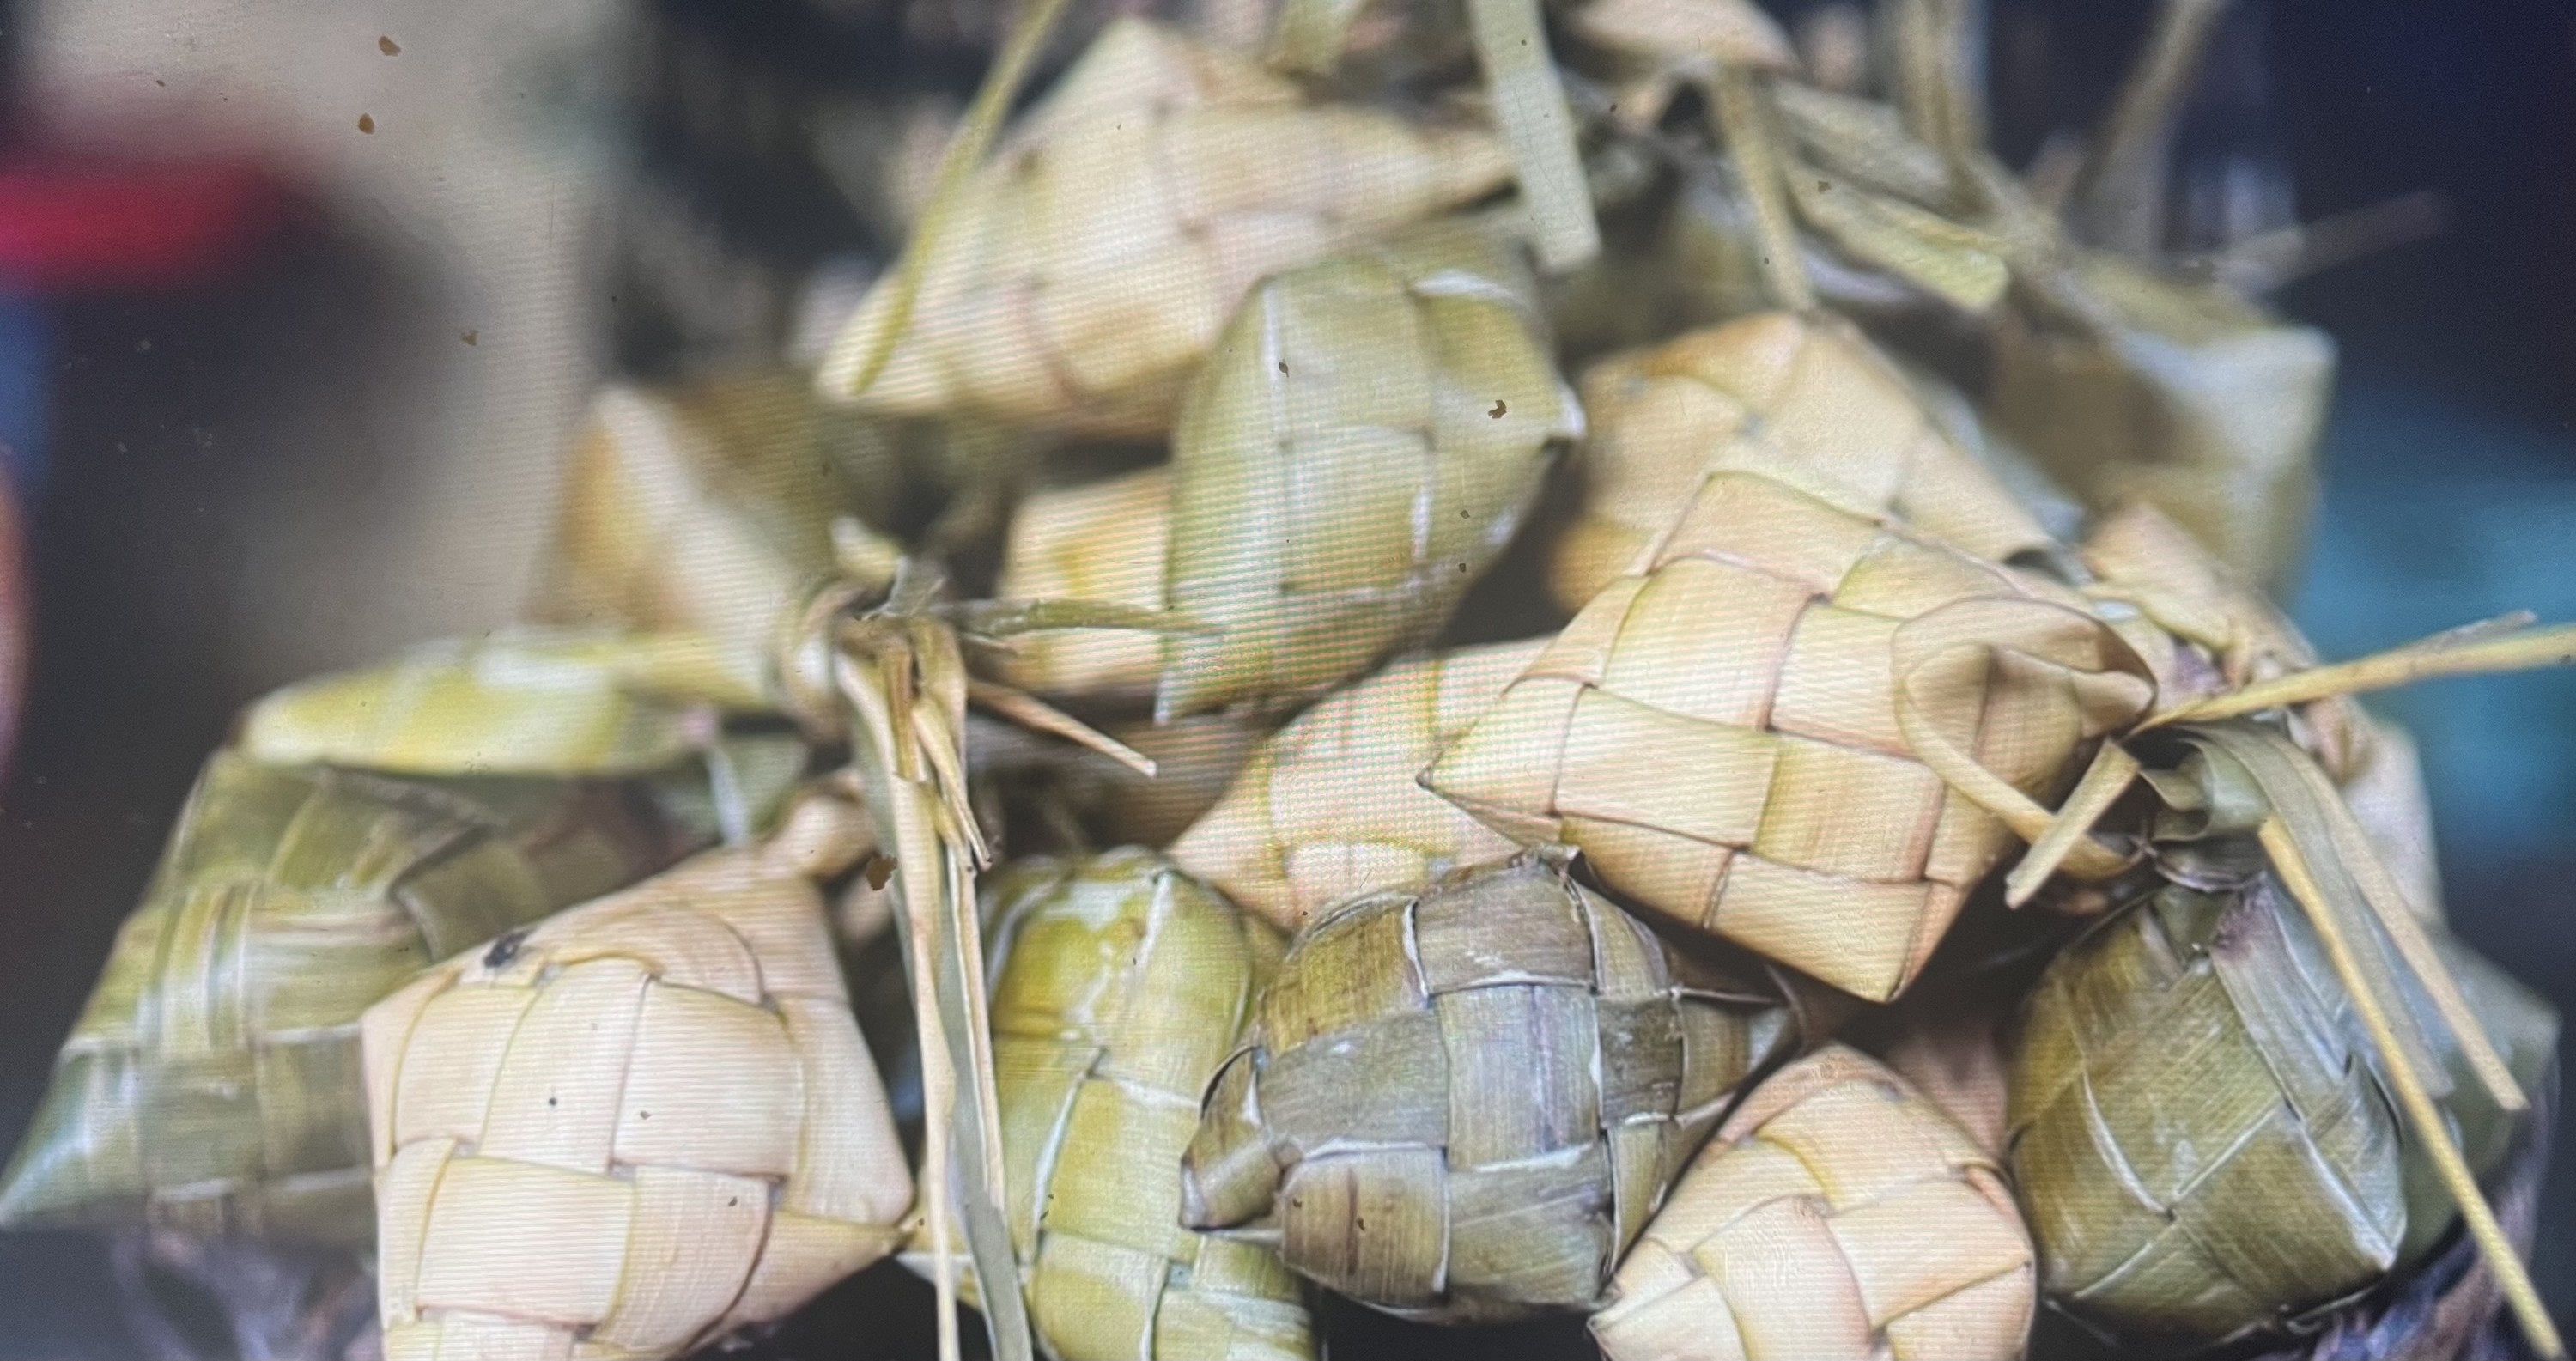 Small rice packets wrapped in woven coconut leaves